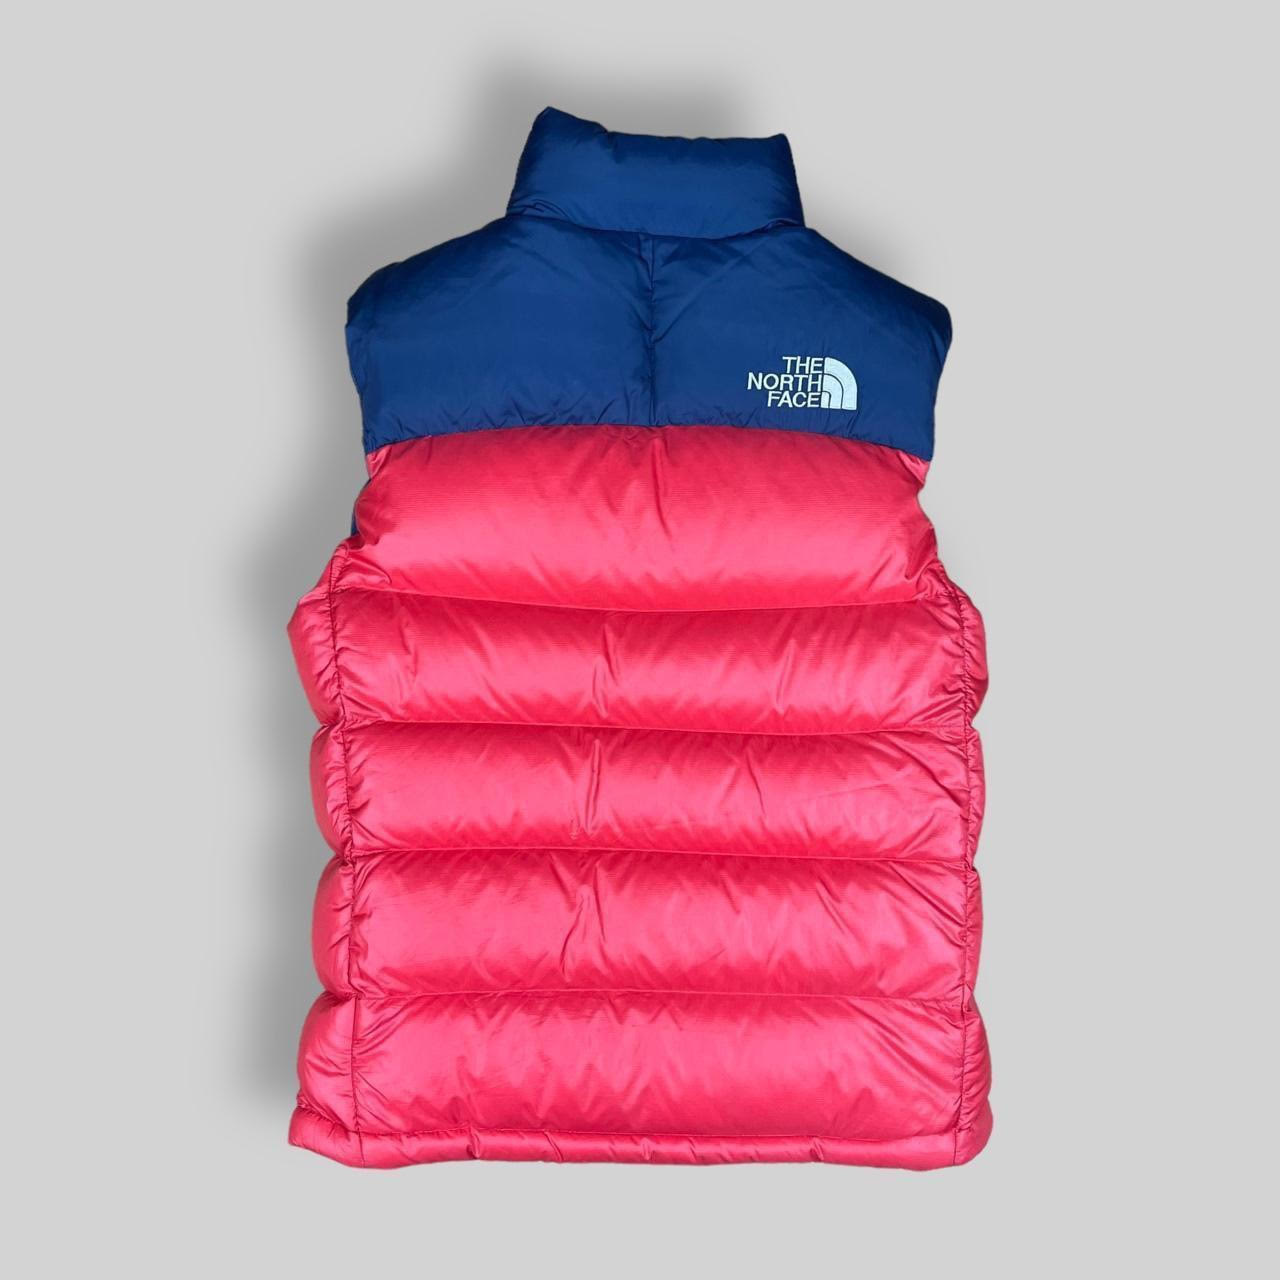 The North Face 700 Gilet Puffer (XS)